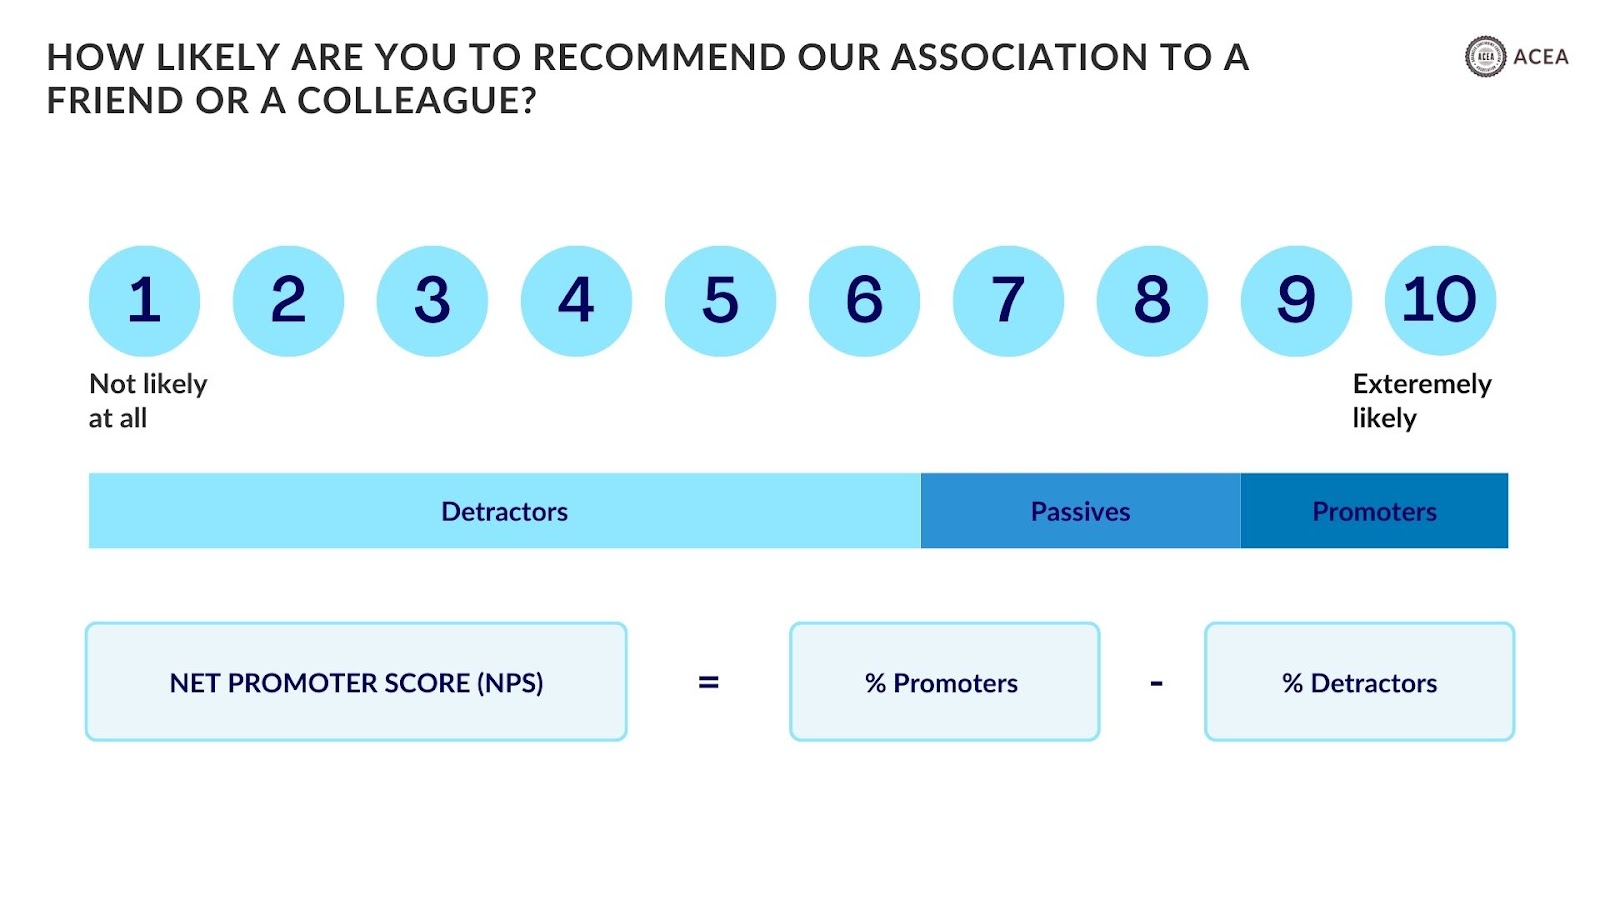 How likely re you to recommend our association to a friend or a colleague